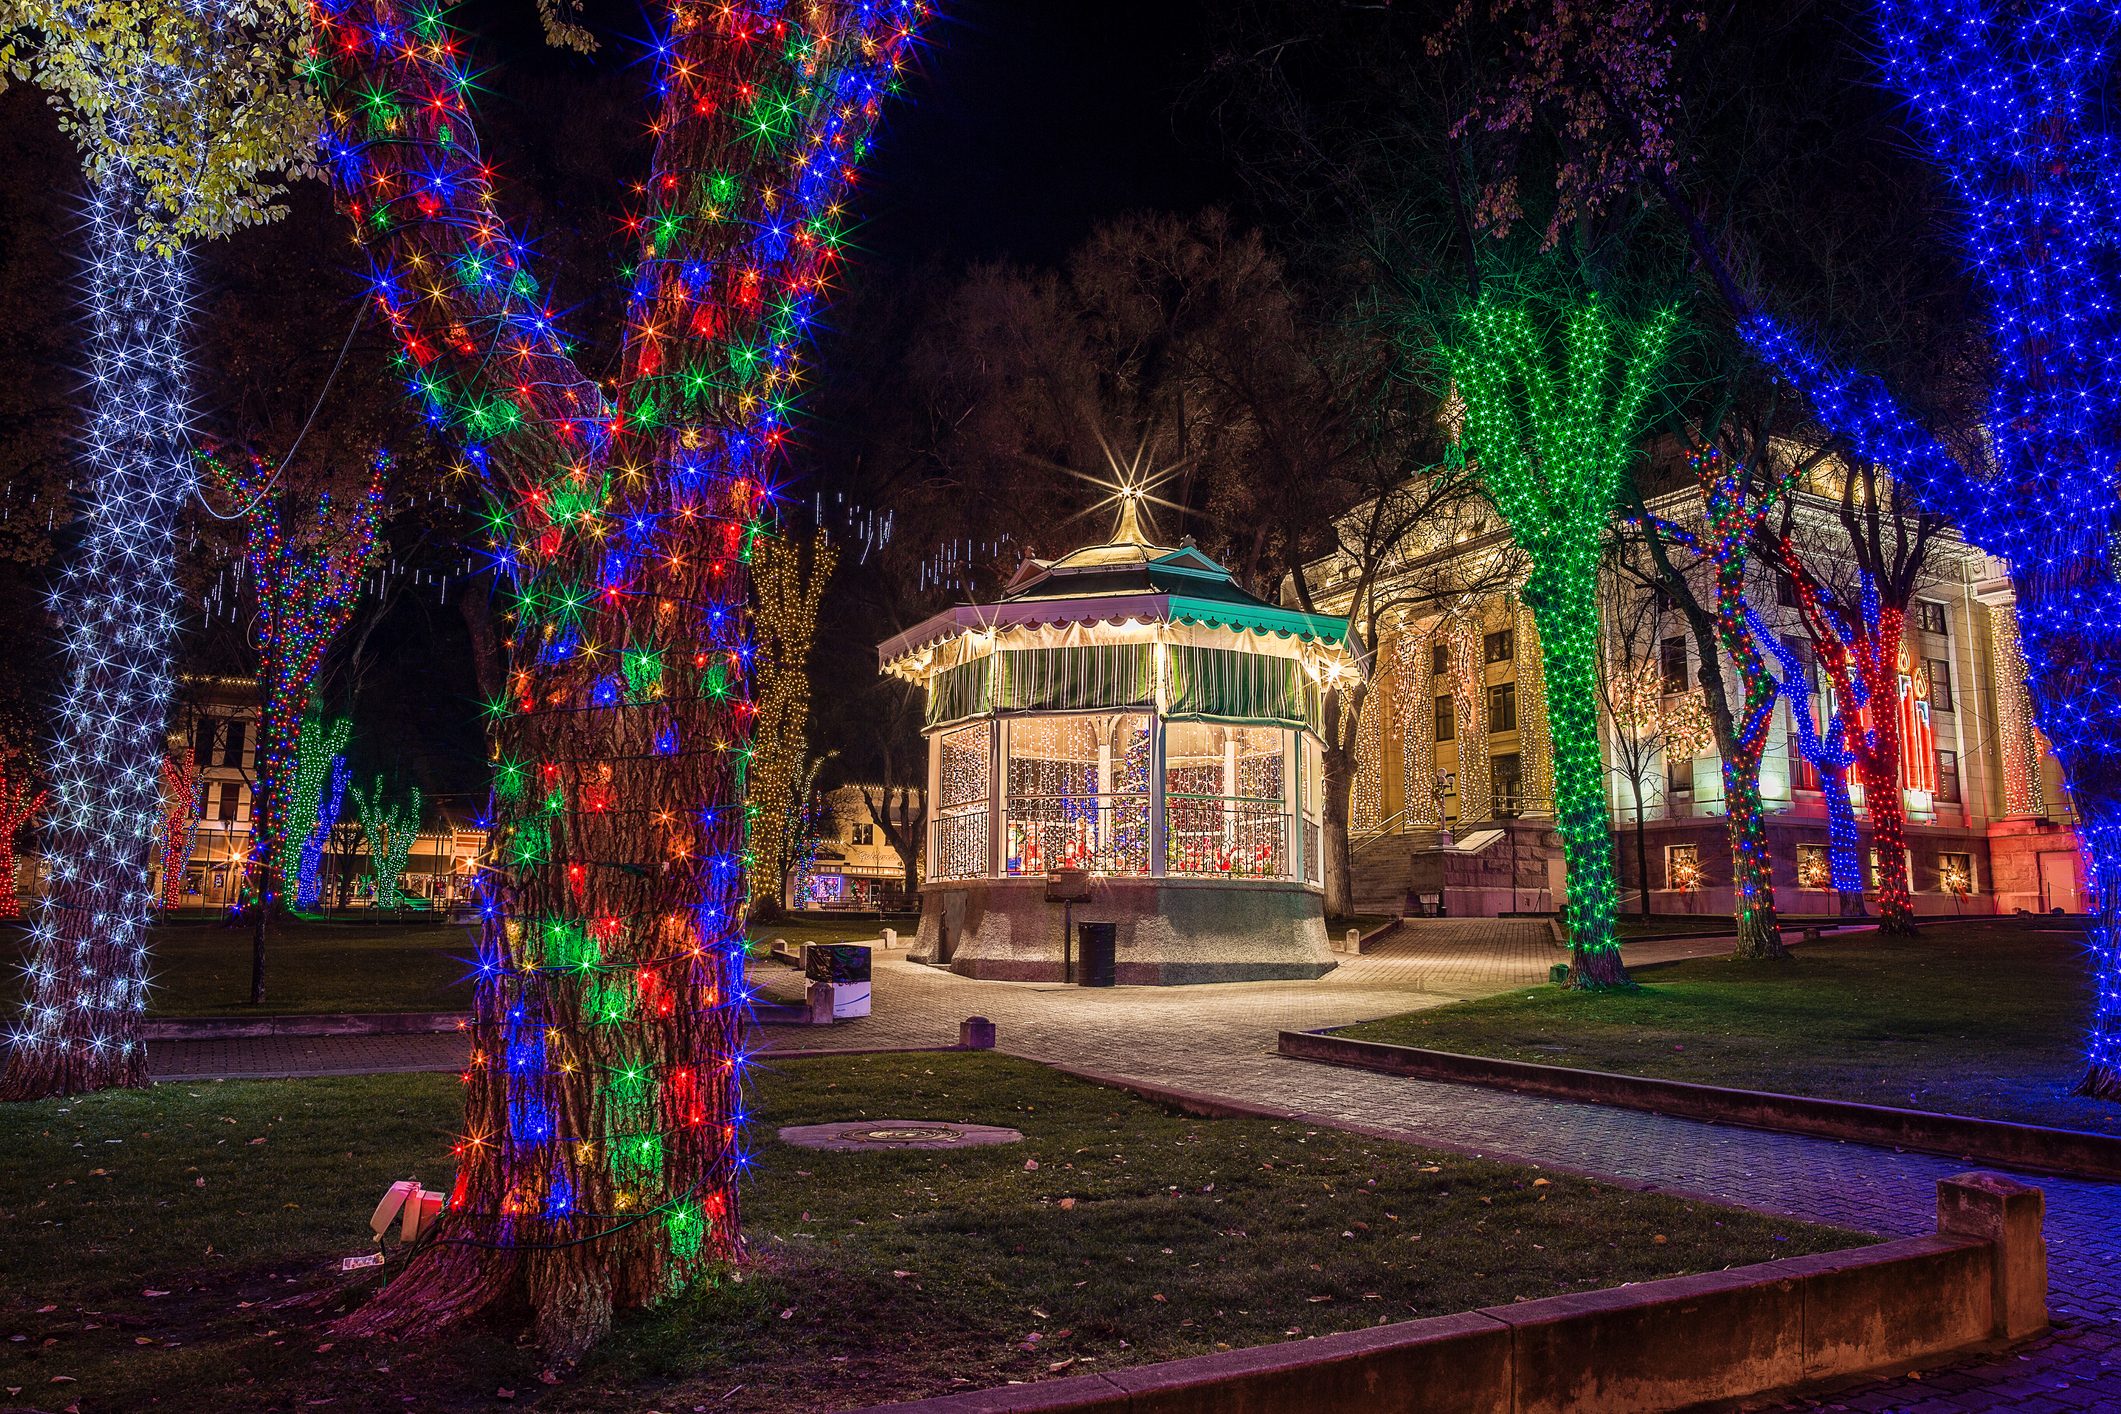 <p><strong>Best for:</strong> Pioneer Christmas spirit</p> <p>"Arizona's Christmas City" earns its nickname with tons of events to celebrate the season in this western gem of a town. The Courthouse Lighting, preceded by the annual Christmas parade, illuminates the gorgeous historic building as well as over a hundred trees in the main square. Other events include the annual musical showcase, a "Frontier Christmas Carol" performance at Sharlot Hall Museum, and a DIY wreath-making workshop at Highlands Center for Natural History.</p> <p>A restored 1920s hotel, Hassayampa Inn offers historic elegance in the heart of Prescott, with its gorgeous lobby decked out for the holiday. It's just a short walk to the Courthouse square to see Prescott's light displays.</p> <p class="listicle-page__cta-button-shop"><a class="shop-btn" href="https://www.tripadvisor.com/Hotel_Review-g31323-d115327-Reviews-Hassayampa_Inn-Prescott_Arizona.html">Book Now</a></p>